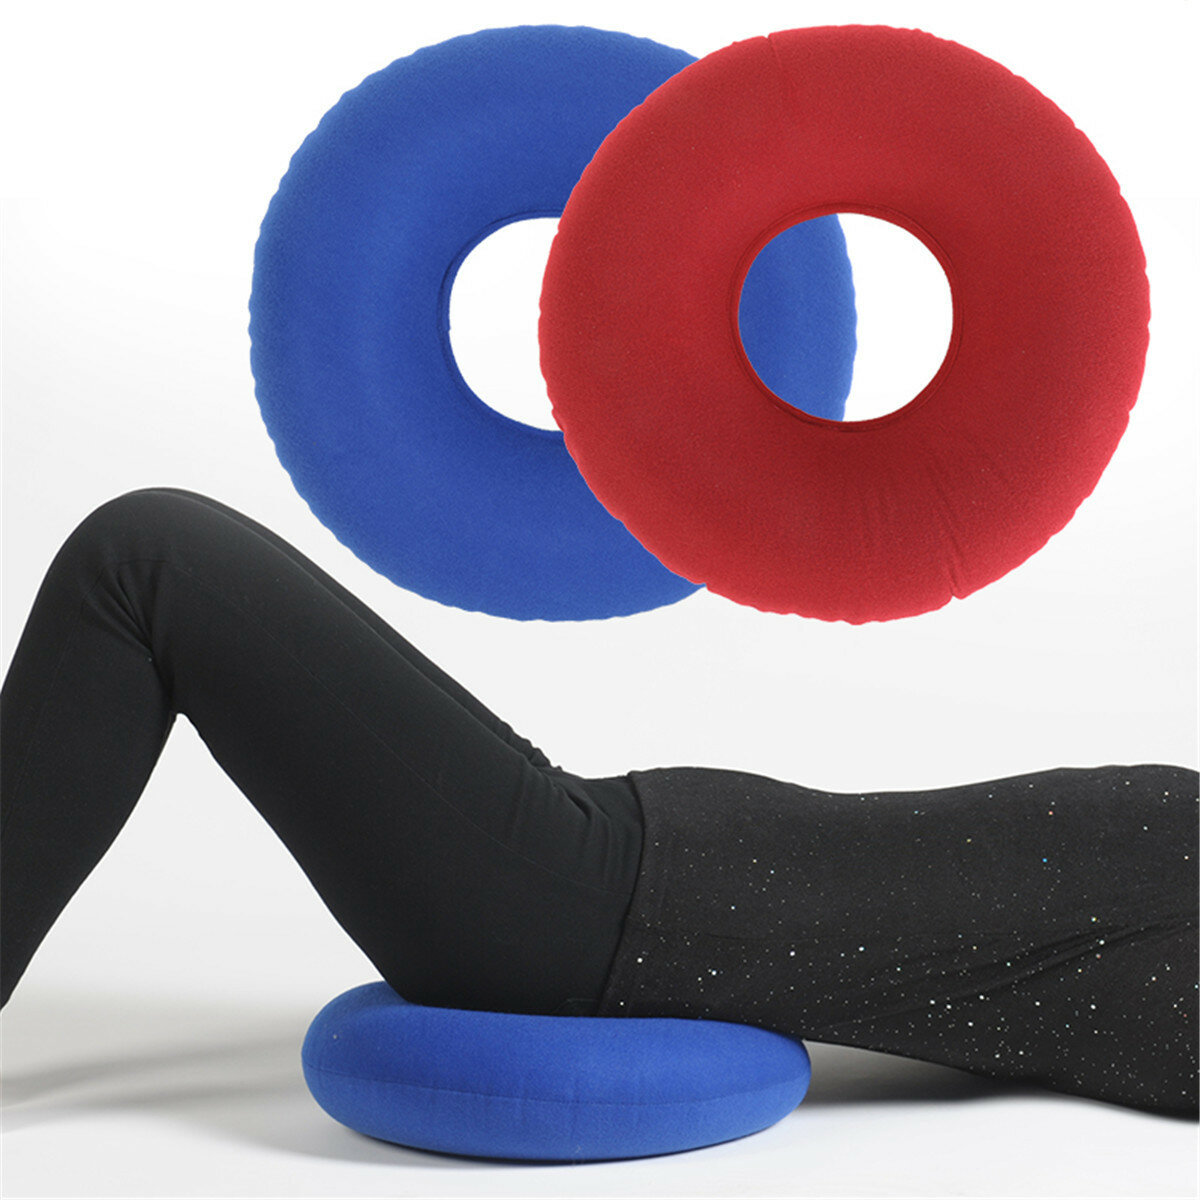 36x13CM Round Inflatable Cushion Seat Pad Massage Cushion Mat Hemorrhoid Pillow With Pump for Office